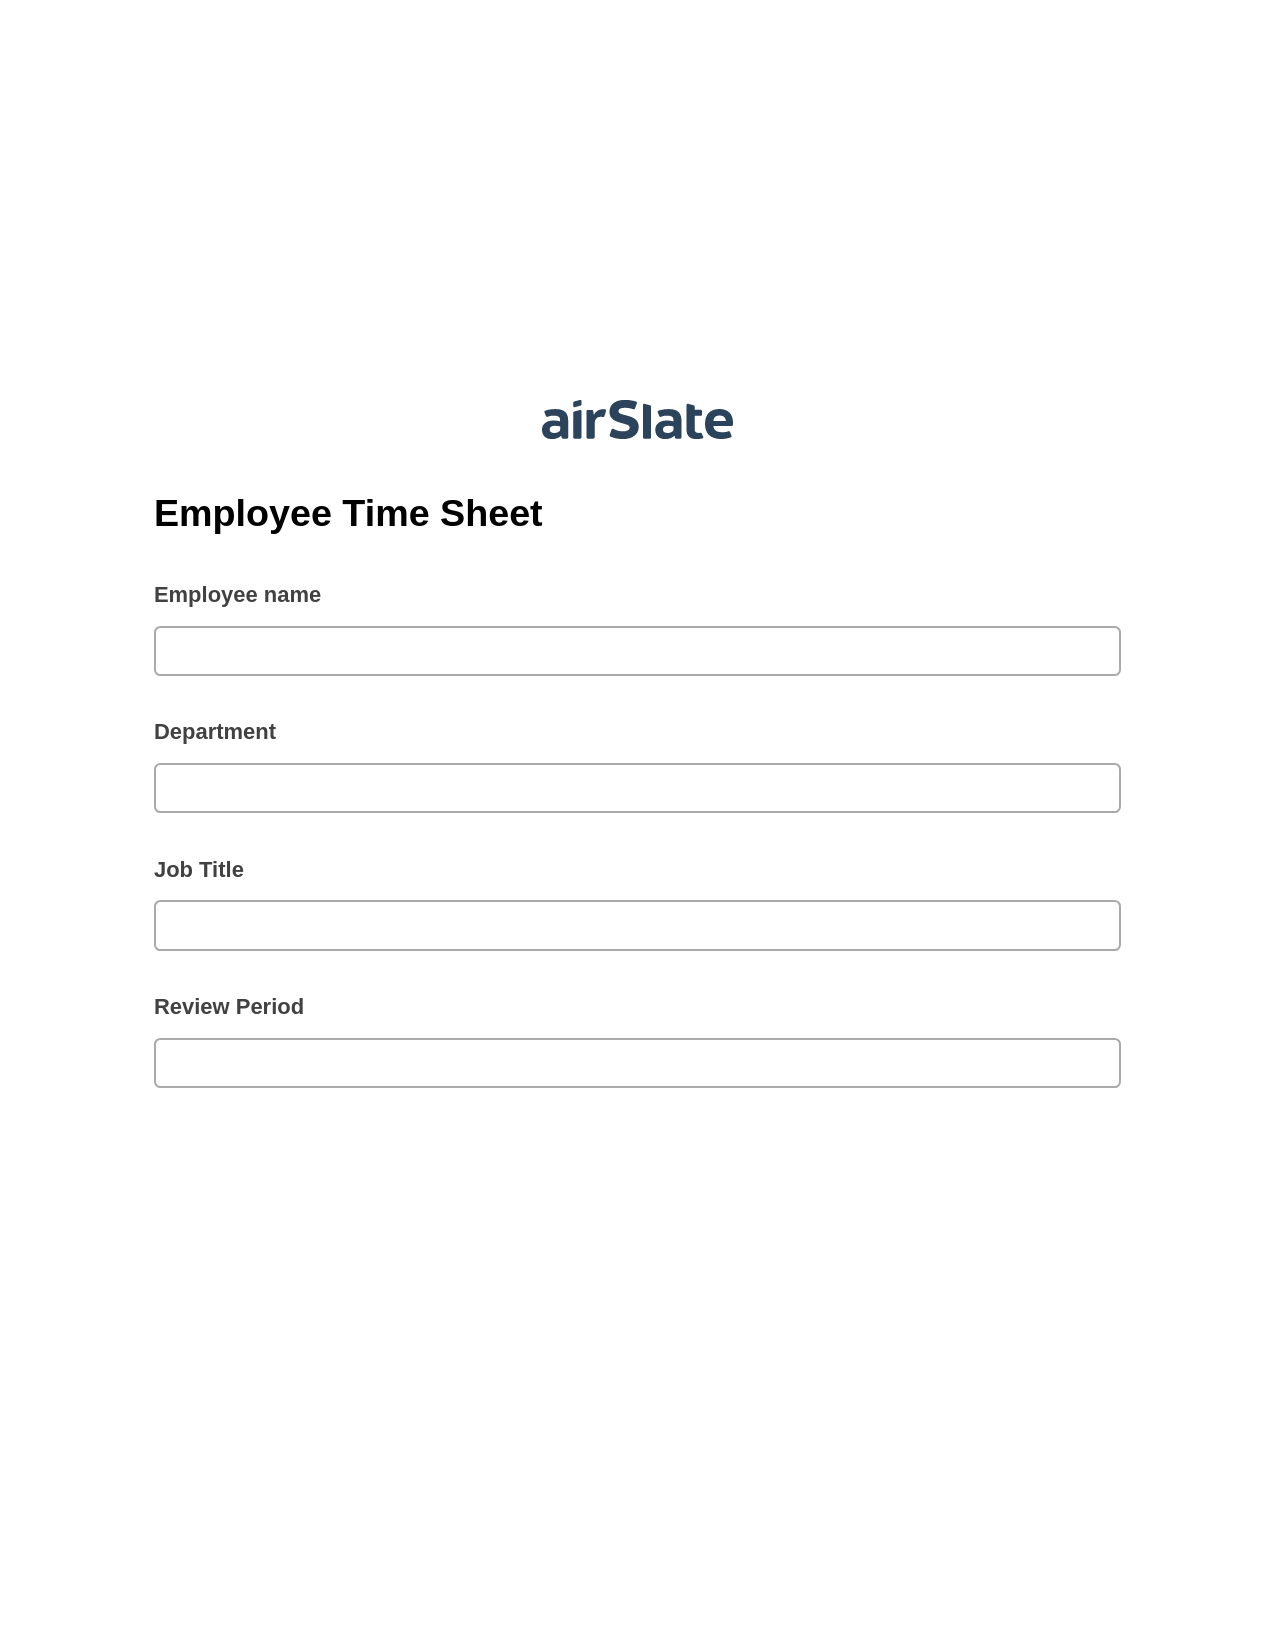 Employee Time Sheet Pre-fill from another Slate Bot, Create Salesforce Records Bot, Post-finish Document Bot